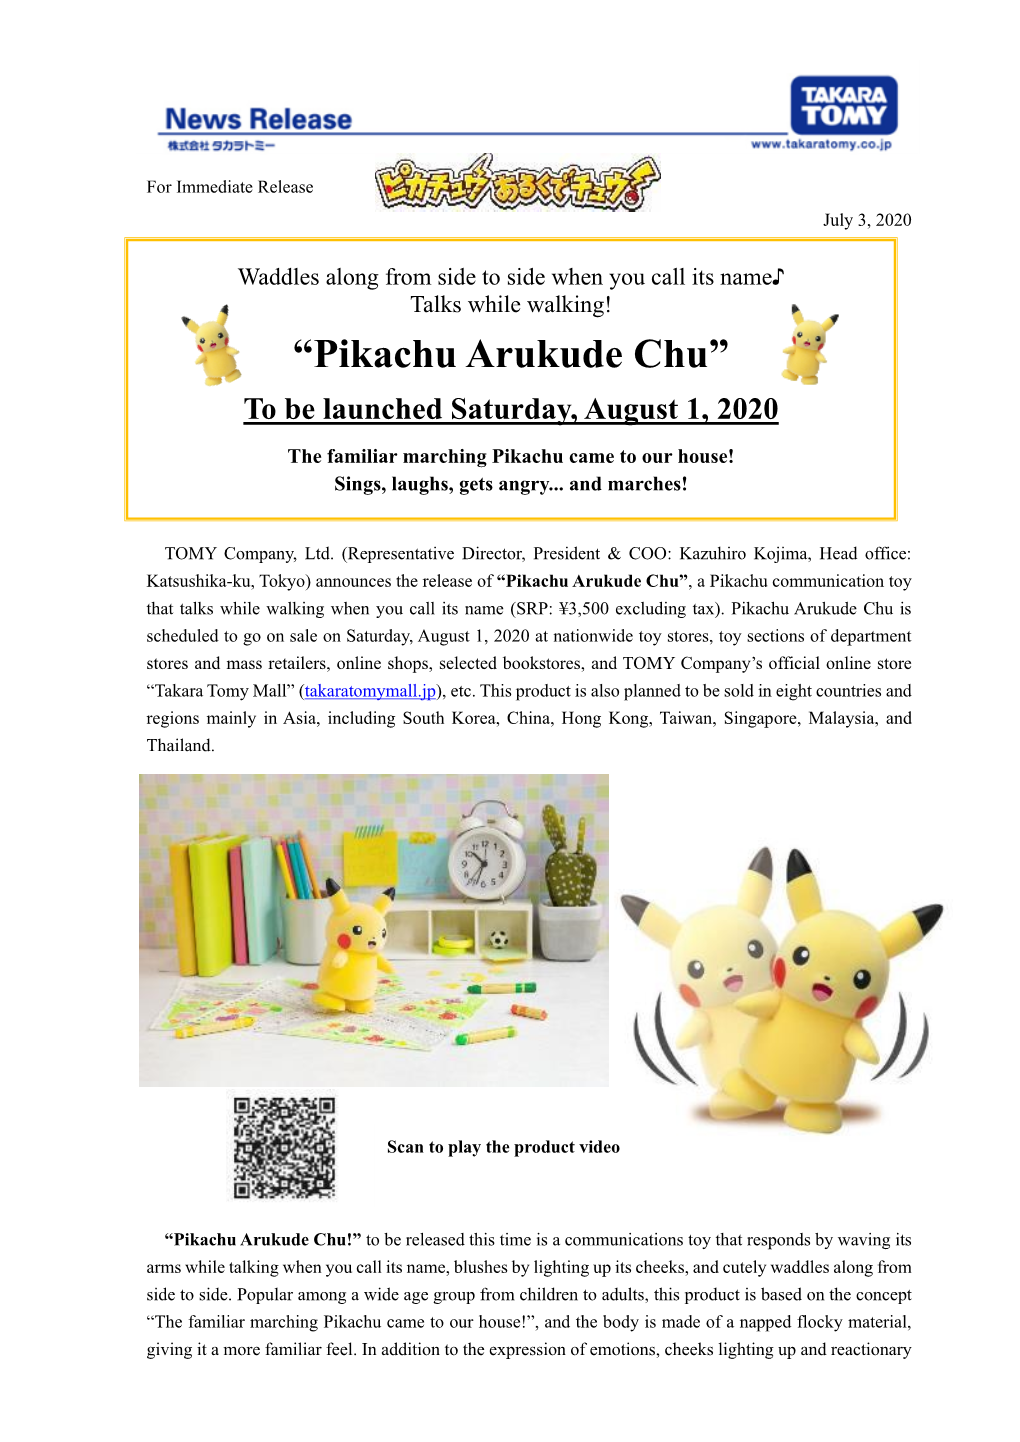 “Pikachu Arukude Chu” to Be Launched Saturday, August 1, 2020